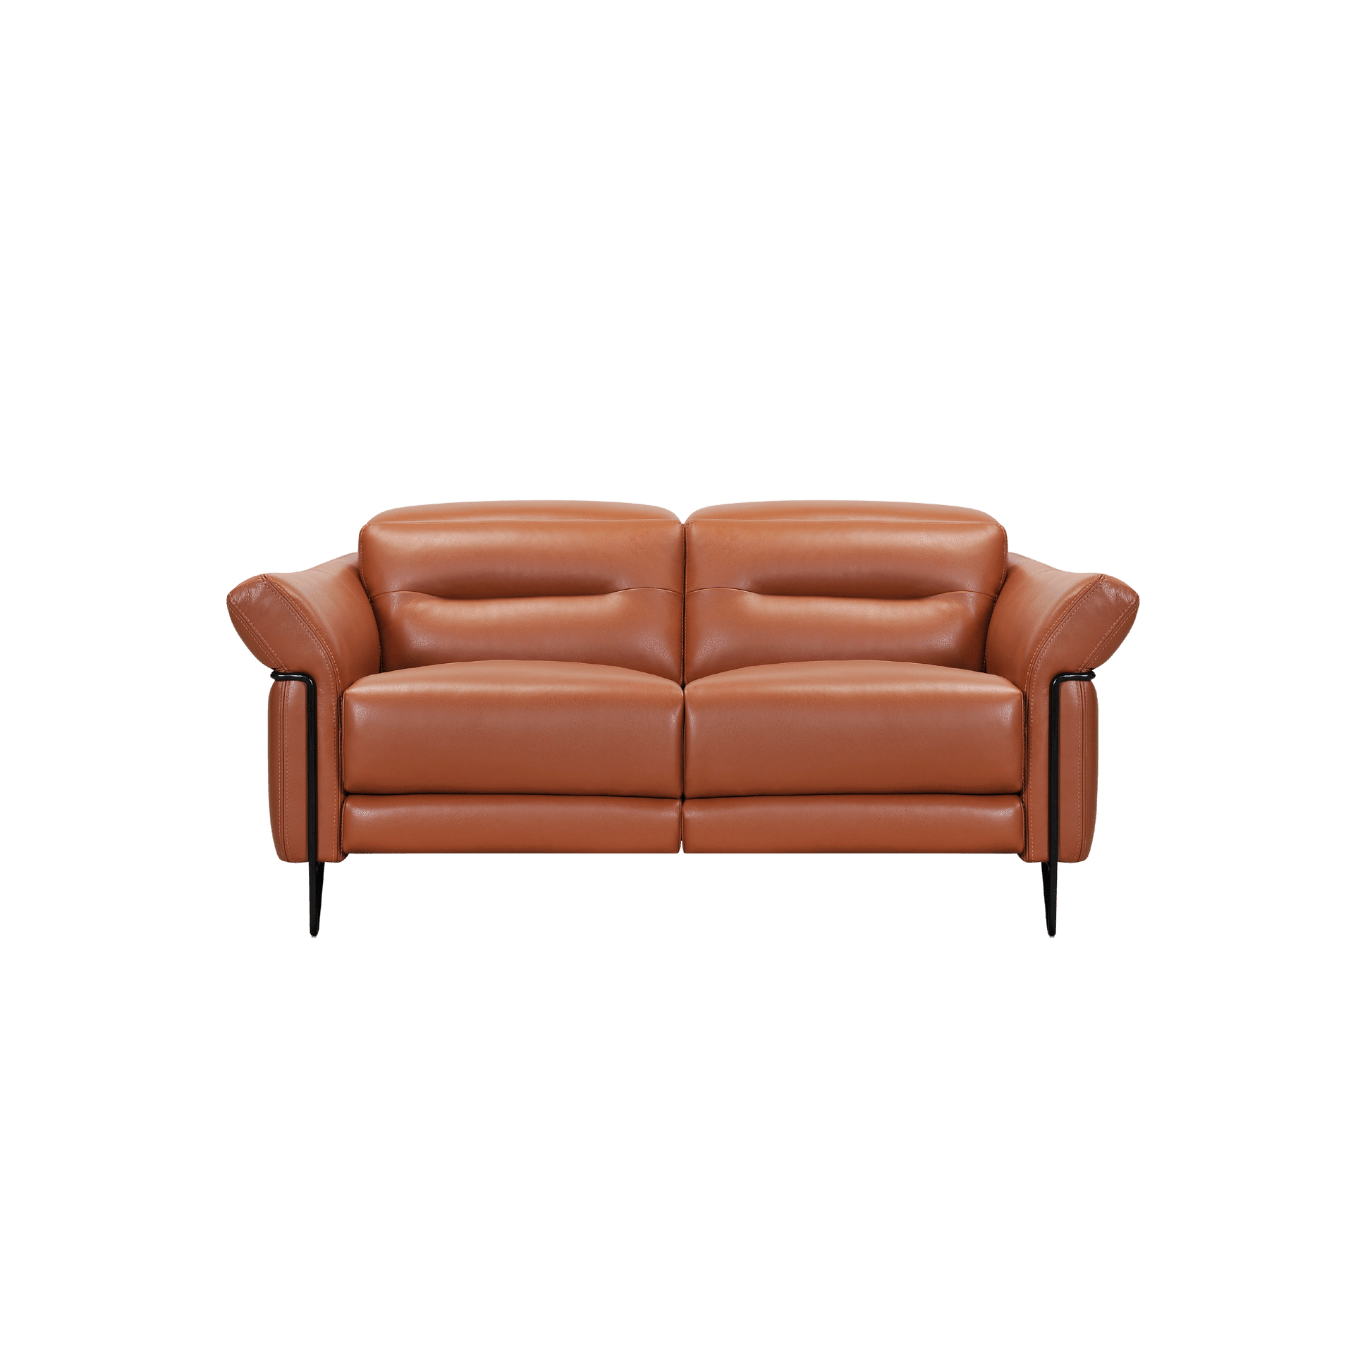 Sylvaine Sofa / Power Incliner + Adjustable Headrest / Full Leather Casa Concetto Singapore